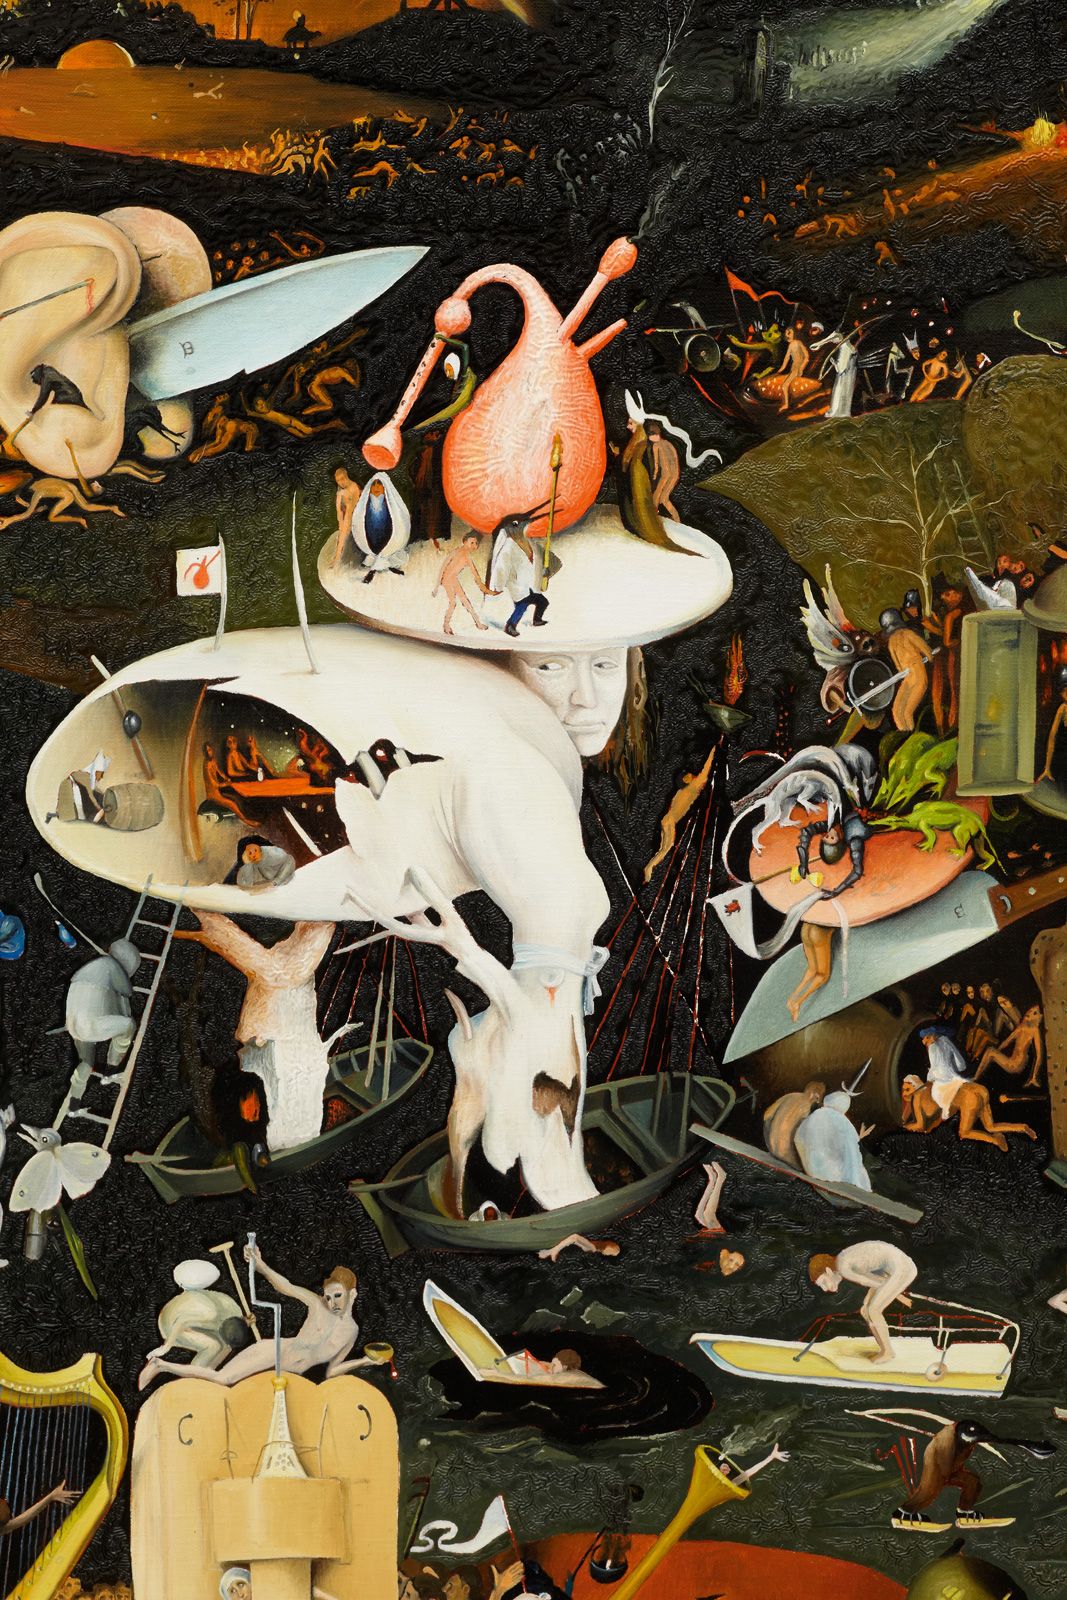 Intricate reimagining of Hieronymus Bosch’s magnum opus, "The Garden of Earthly Delights" (1490-1510) - Detail.